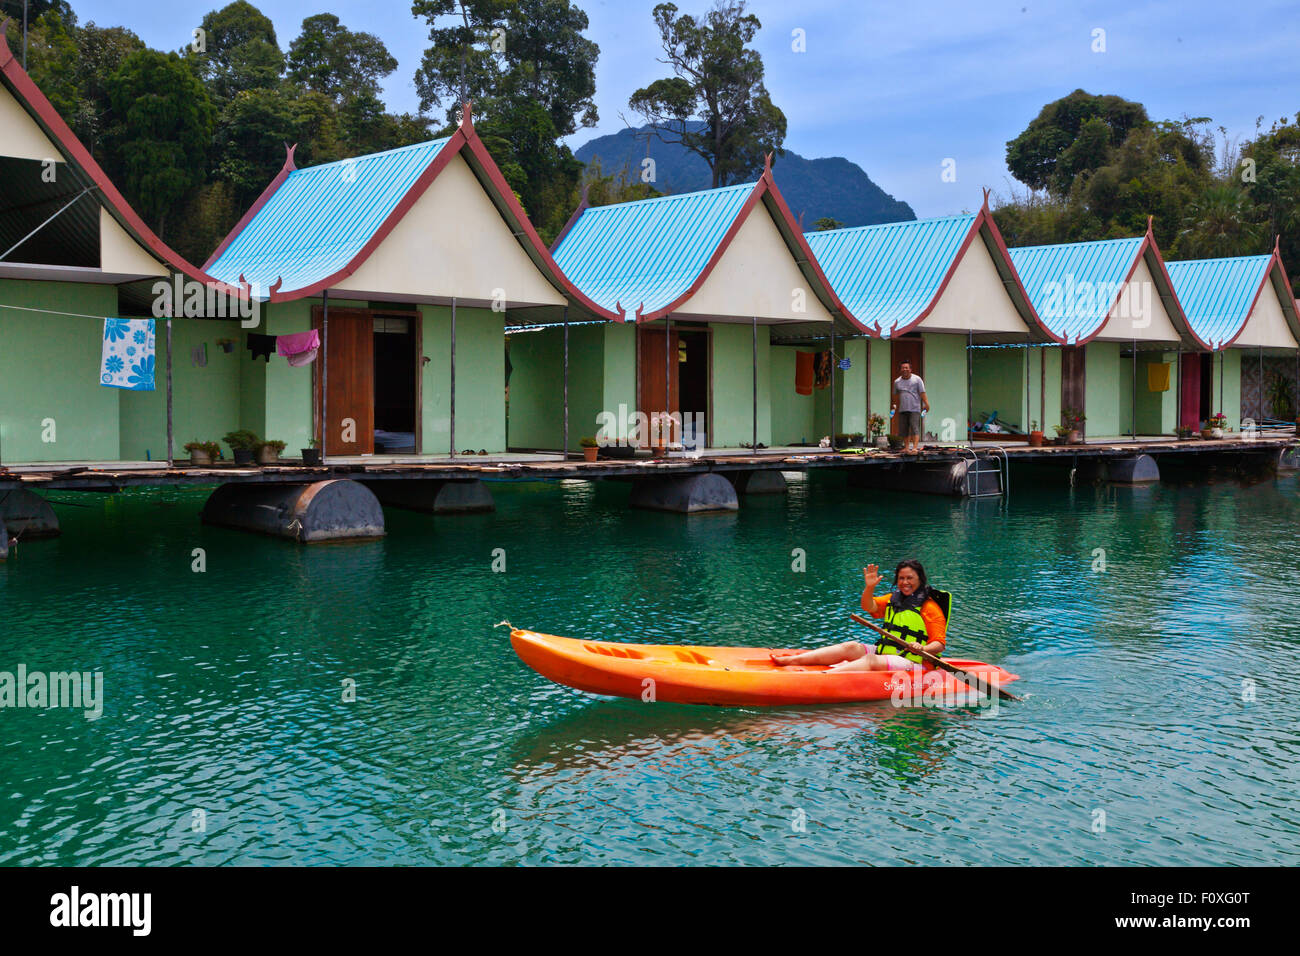 KAYAKING at SMILEYS FLOATING BUNGALOWS which provides mid-range accommodations on CHEOW EN LAKE in KHAO SOK NATIONAL PARK - THAI Stock Photo